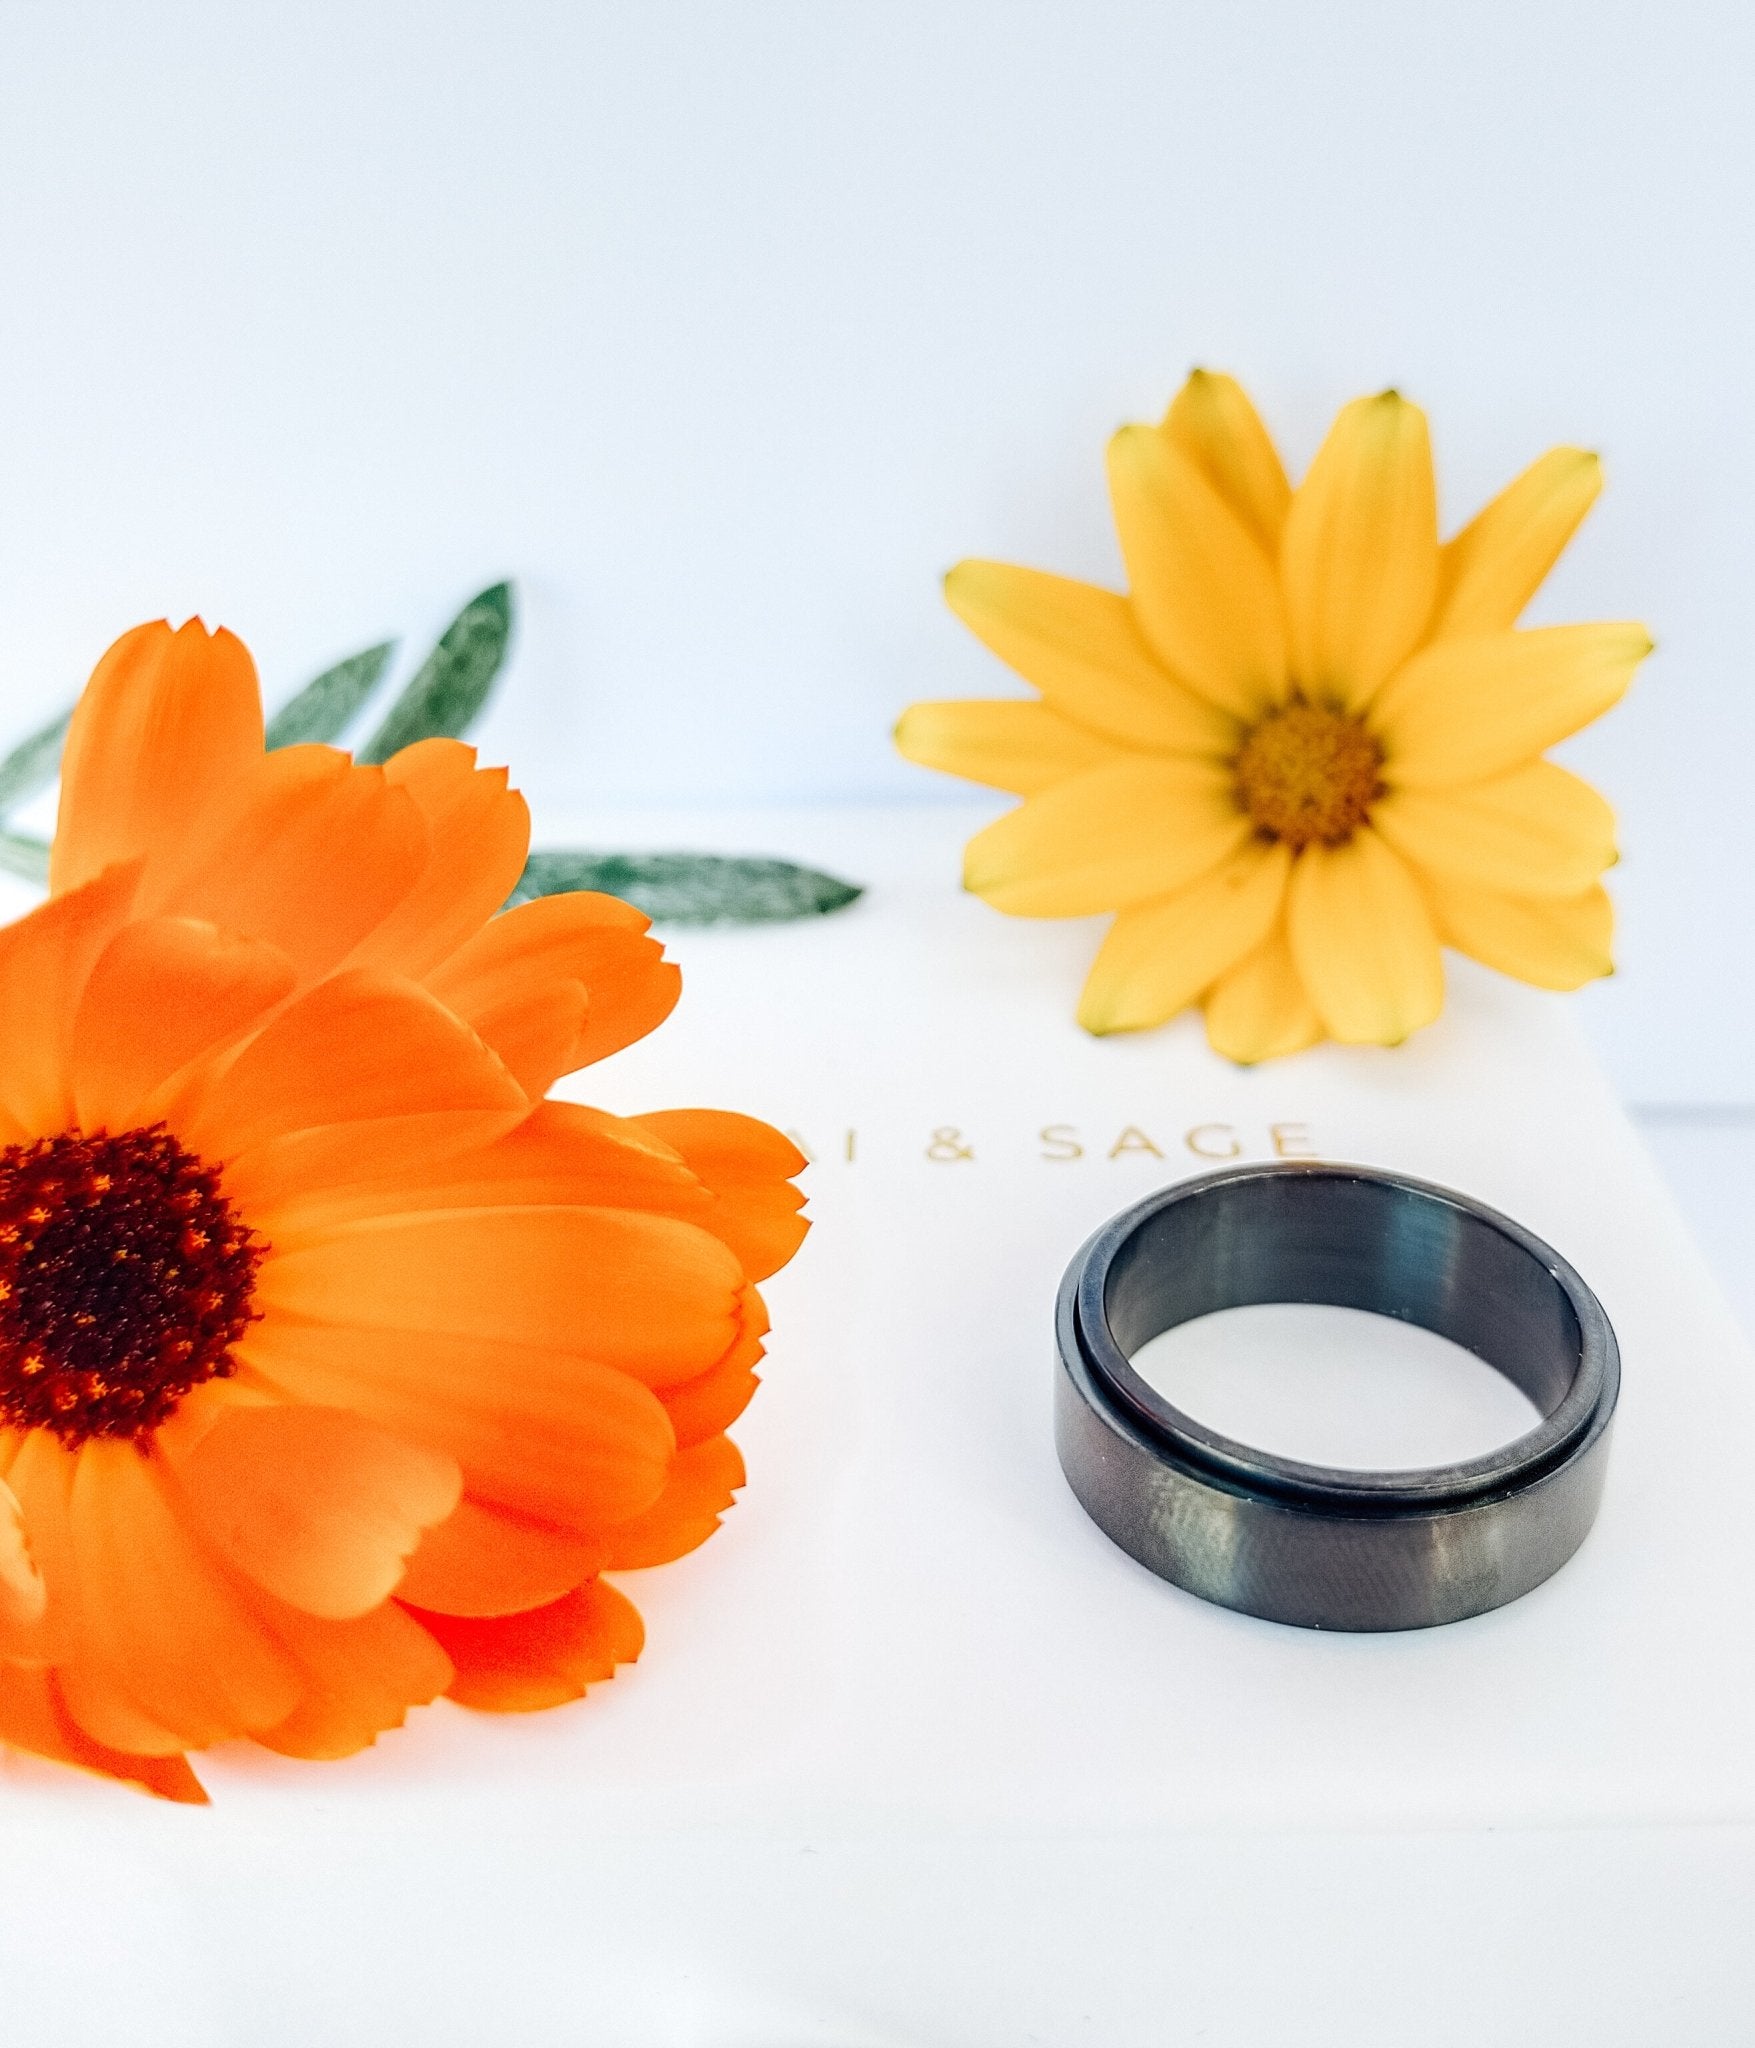 Glitter or Plain Simple Band Fidget Ring - Kowhai and Sage